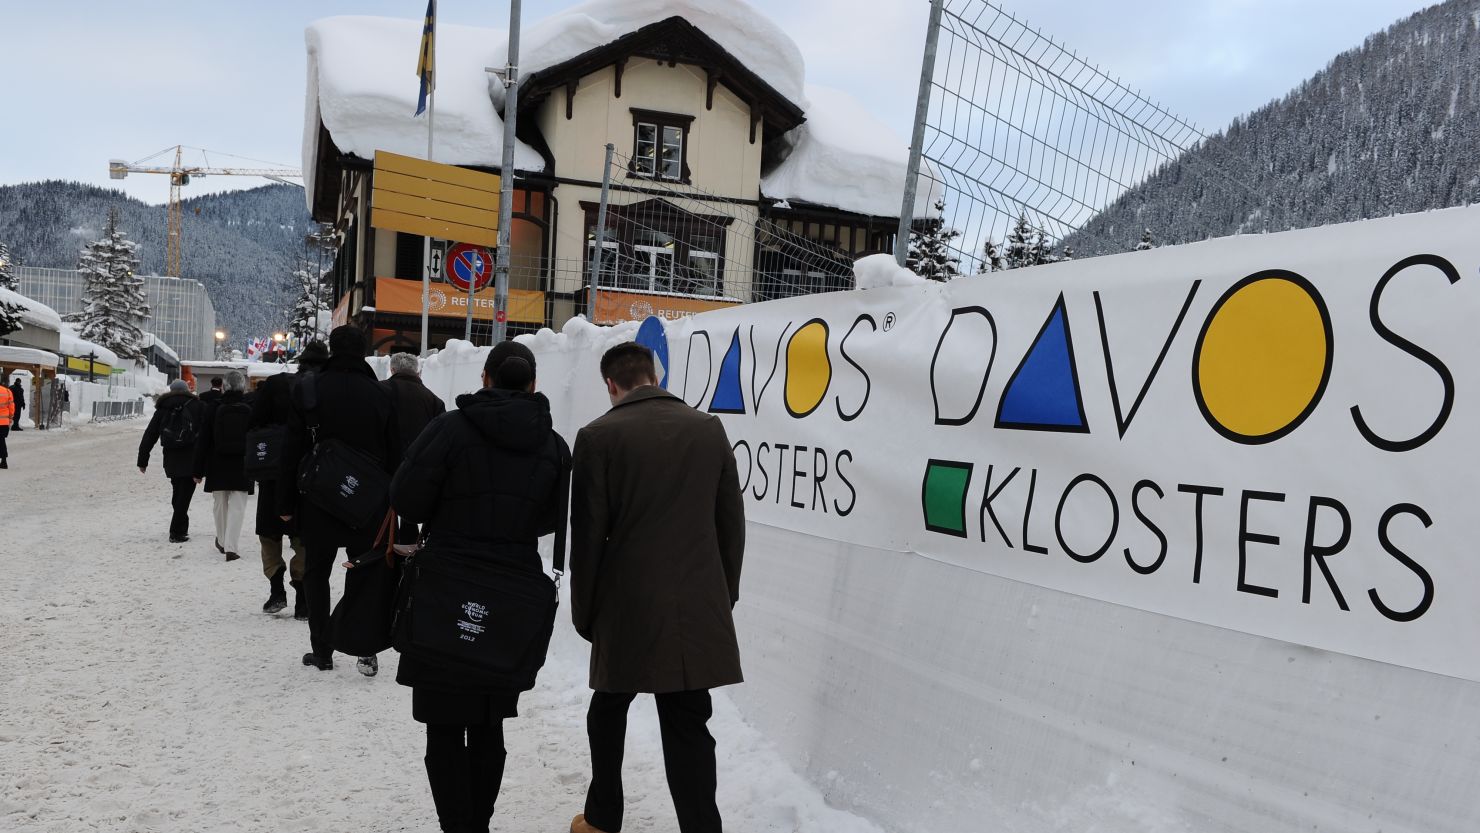 Delegates arrive at the congress hall at last year's World Economic Forum in the Swiss resort of Davos.